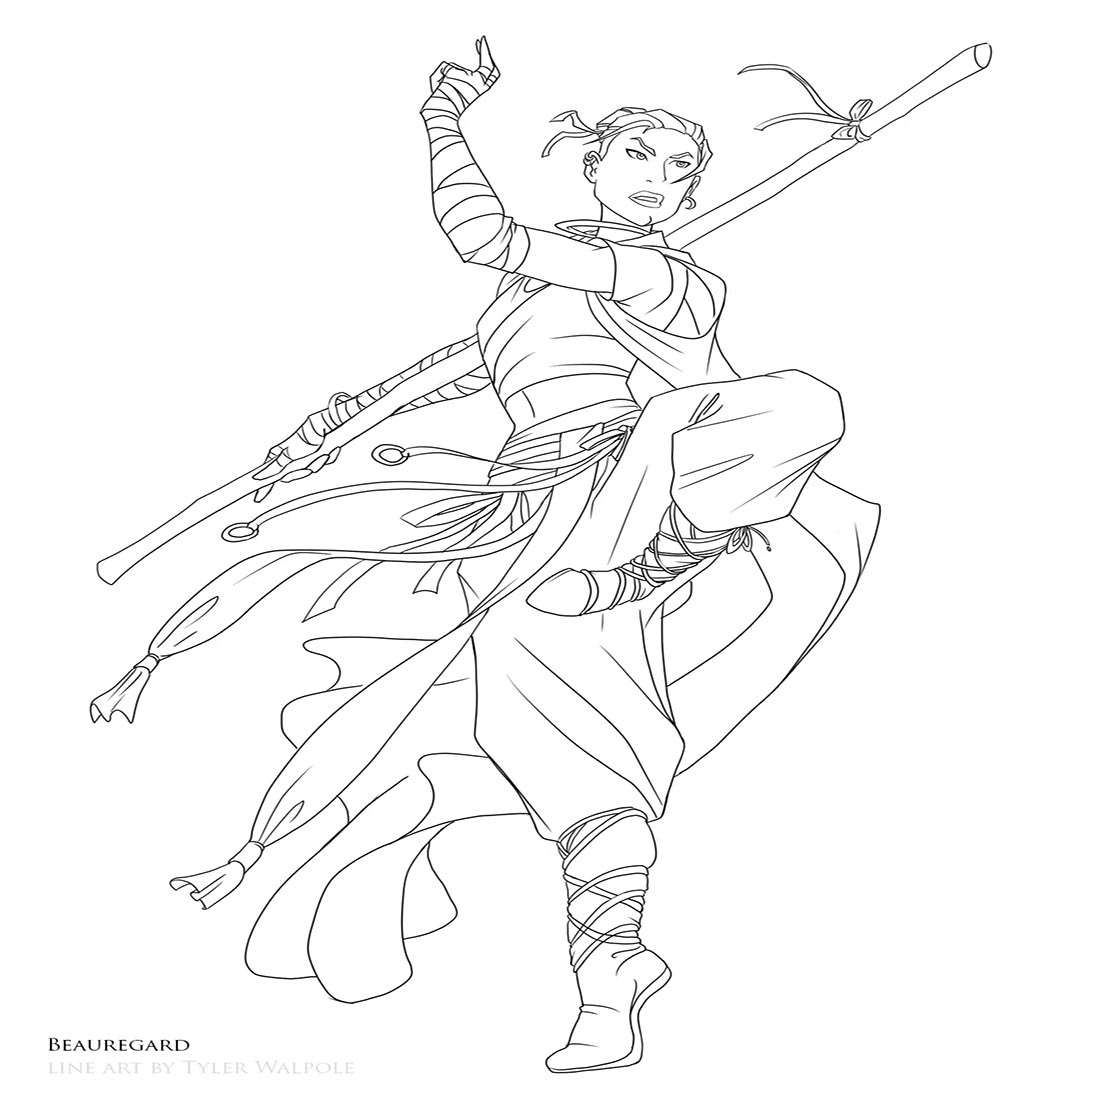 Mighty Nein coloring book preview image.